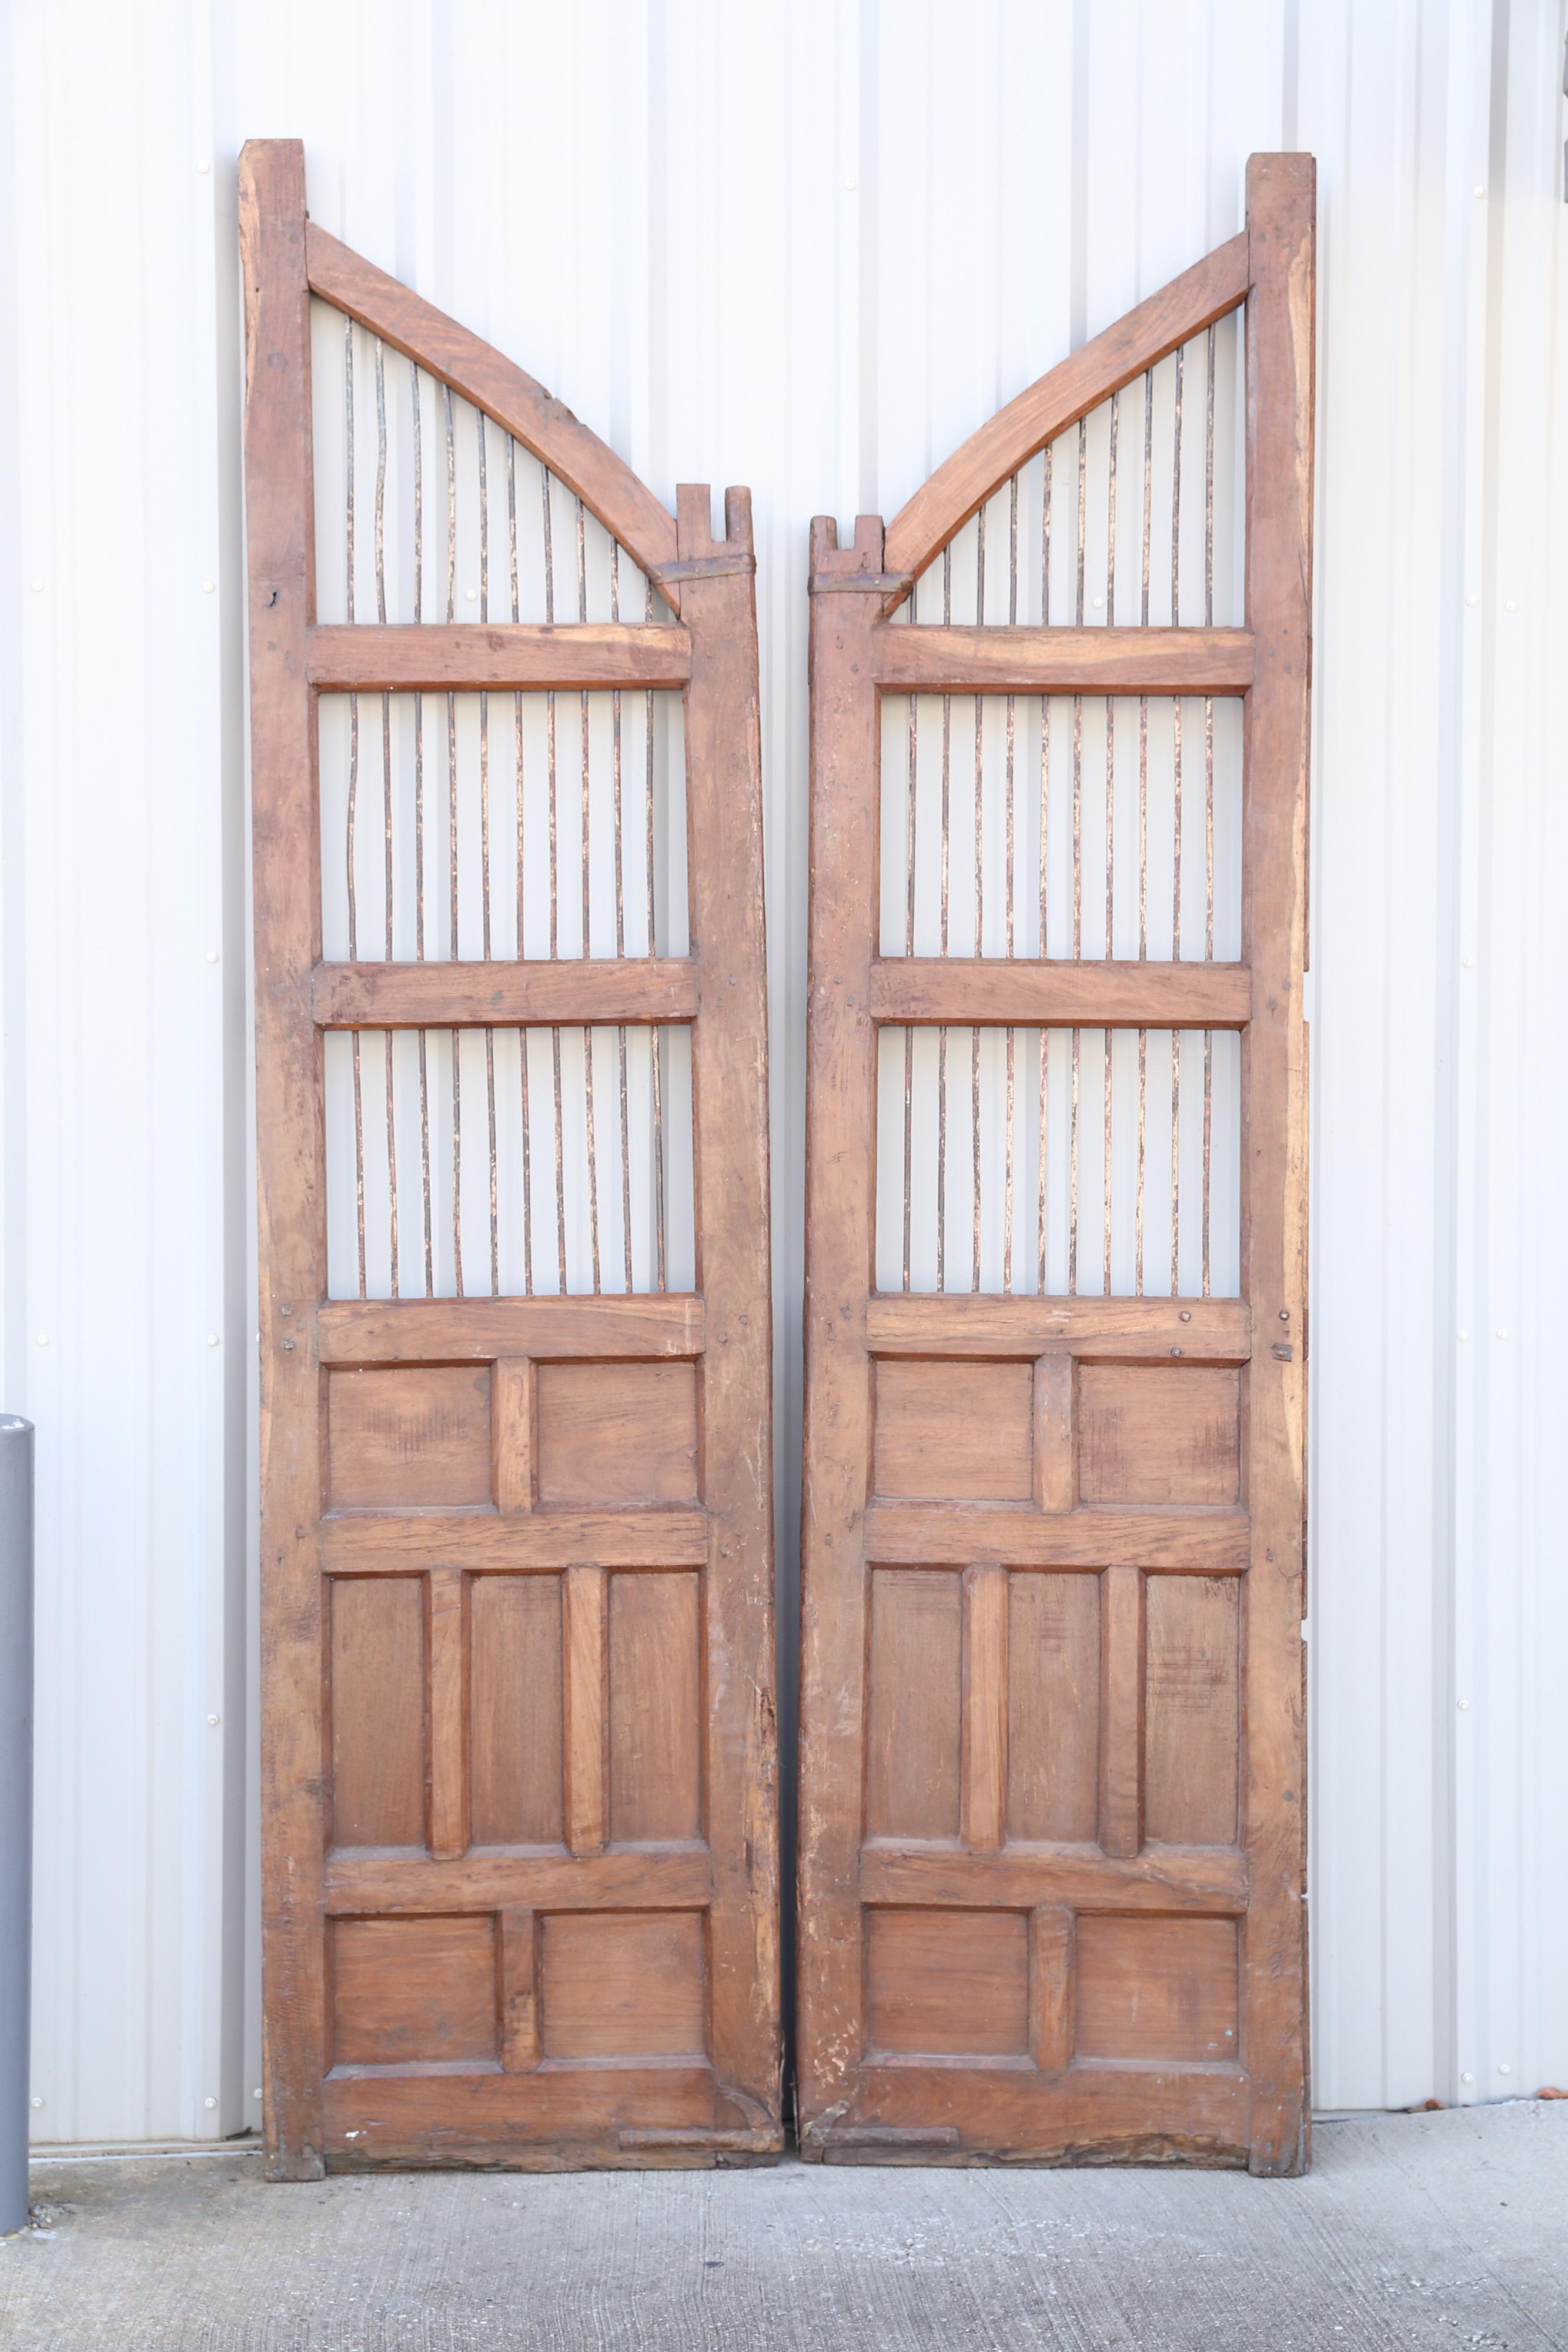 Early 19th Century 1820s Solid Teak Wood Side Entry Door of a Feudal Landlord's Court Yard Home For Sale